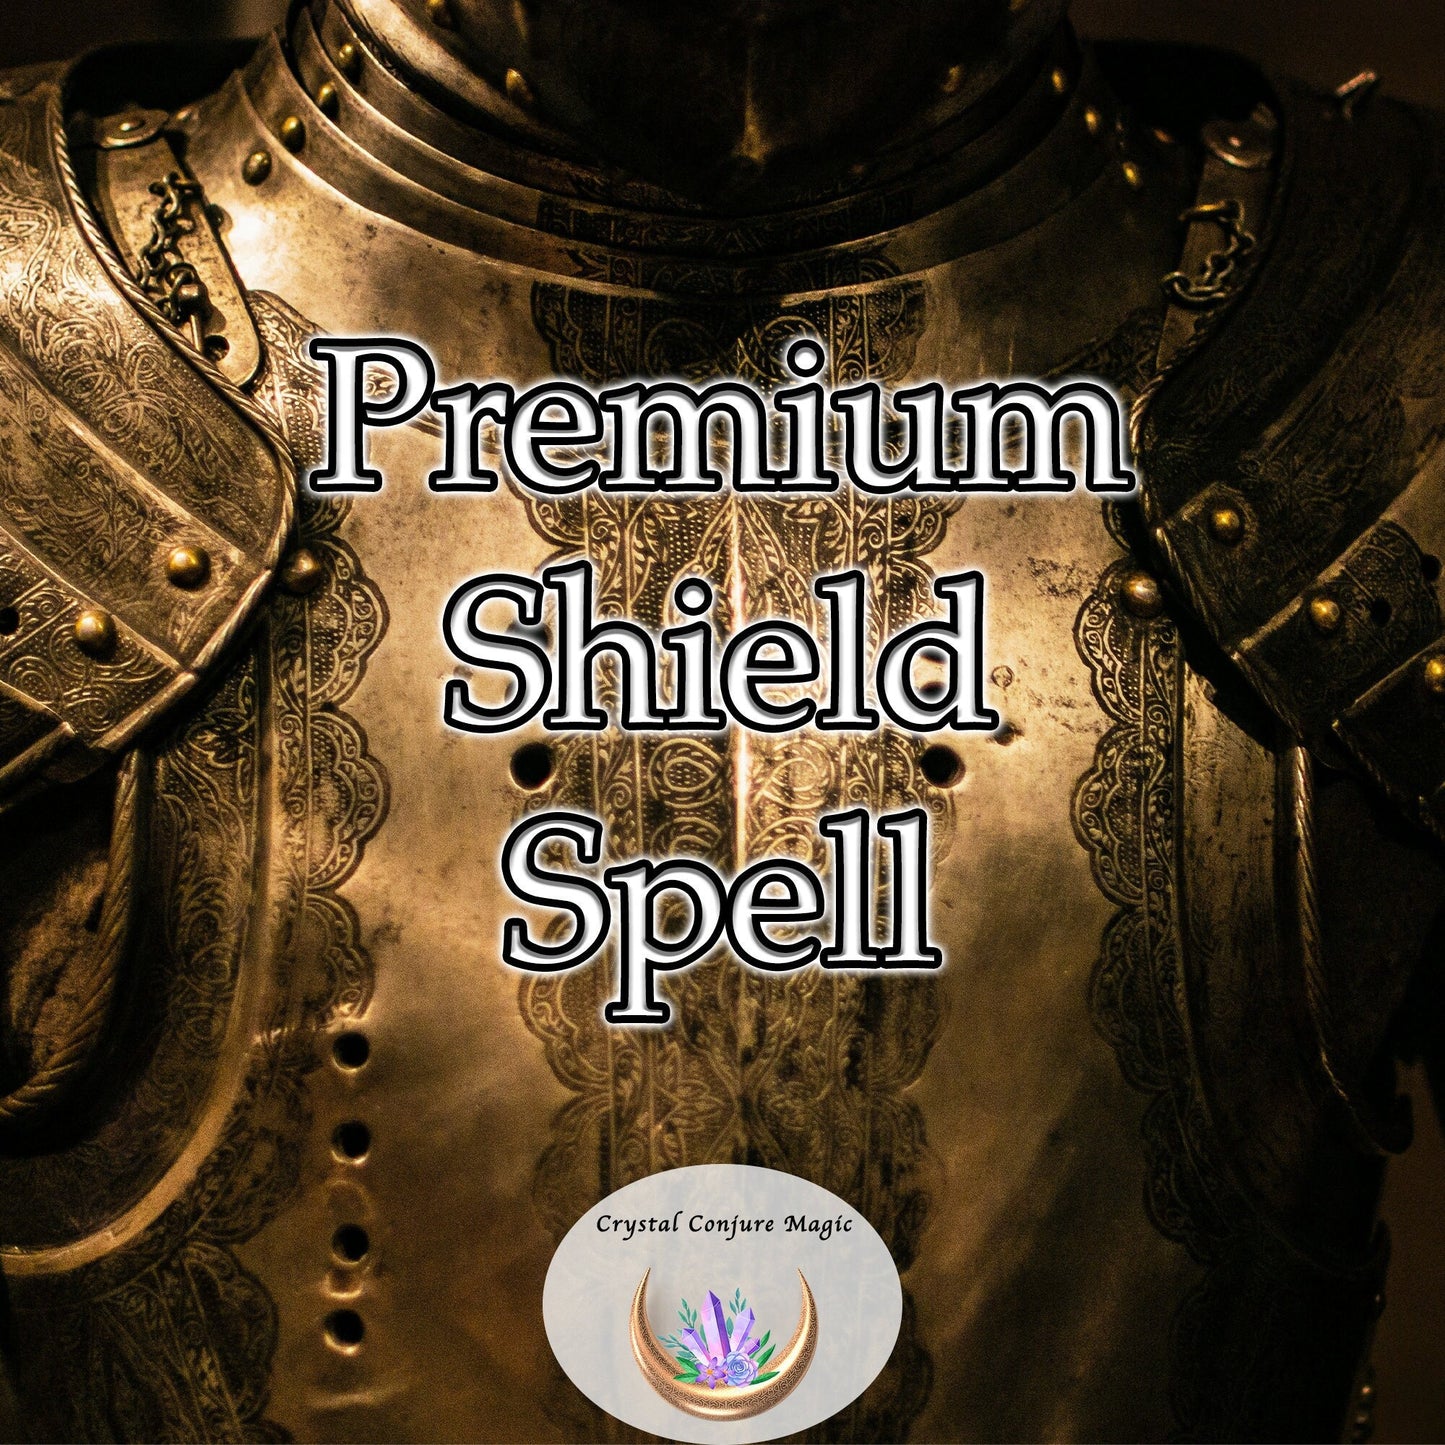 Premium Shield Spell - a suit of armor that protects you from the unpredictable challenges that life often presents